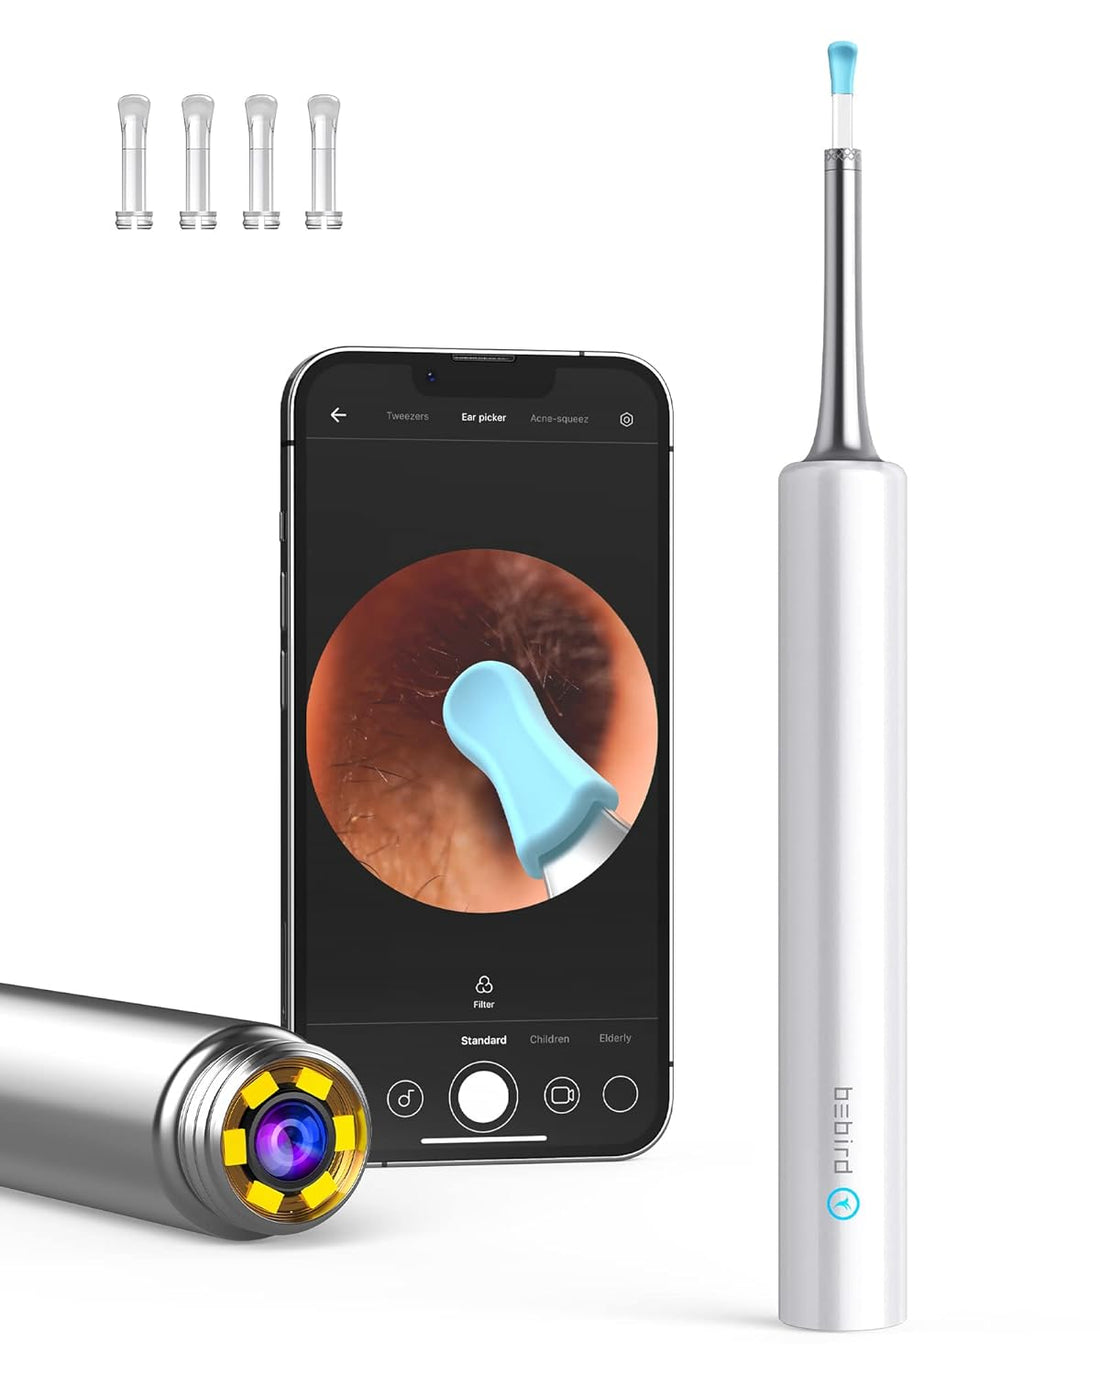 BEBIRD C3 Ear Cleaner, Ear Wax Removal Tool Wireless Otoscope with 1080P HD Waterproof Digital Endoscope with 6 LED Light, 3 Ear Cleaning Kits Mom Gadgets for Baby Ear Cleaner Checking (White)